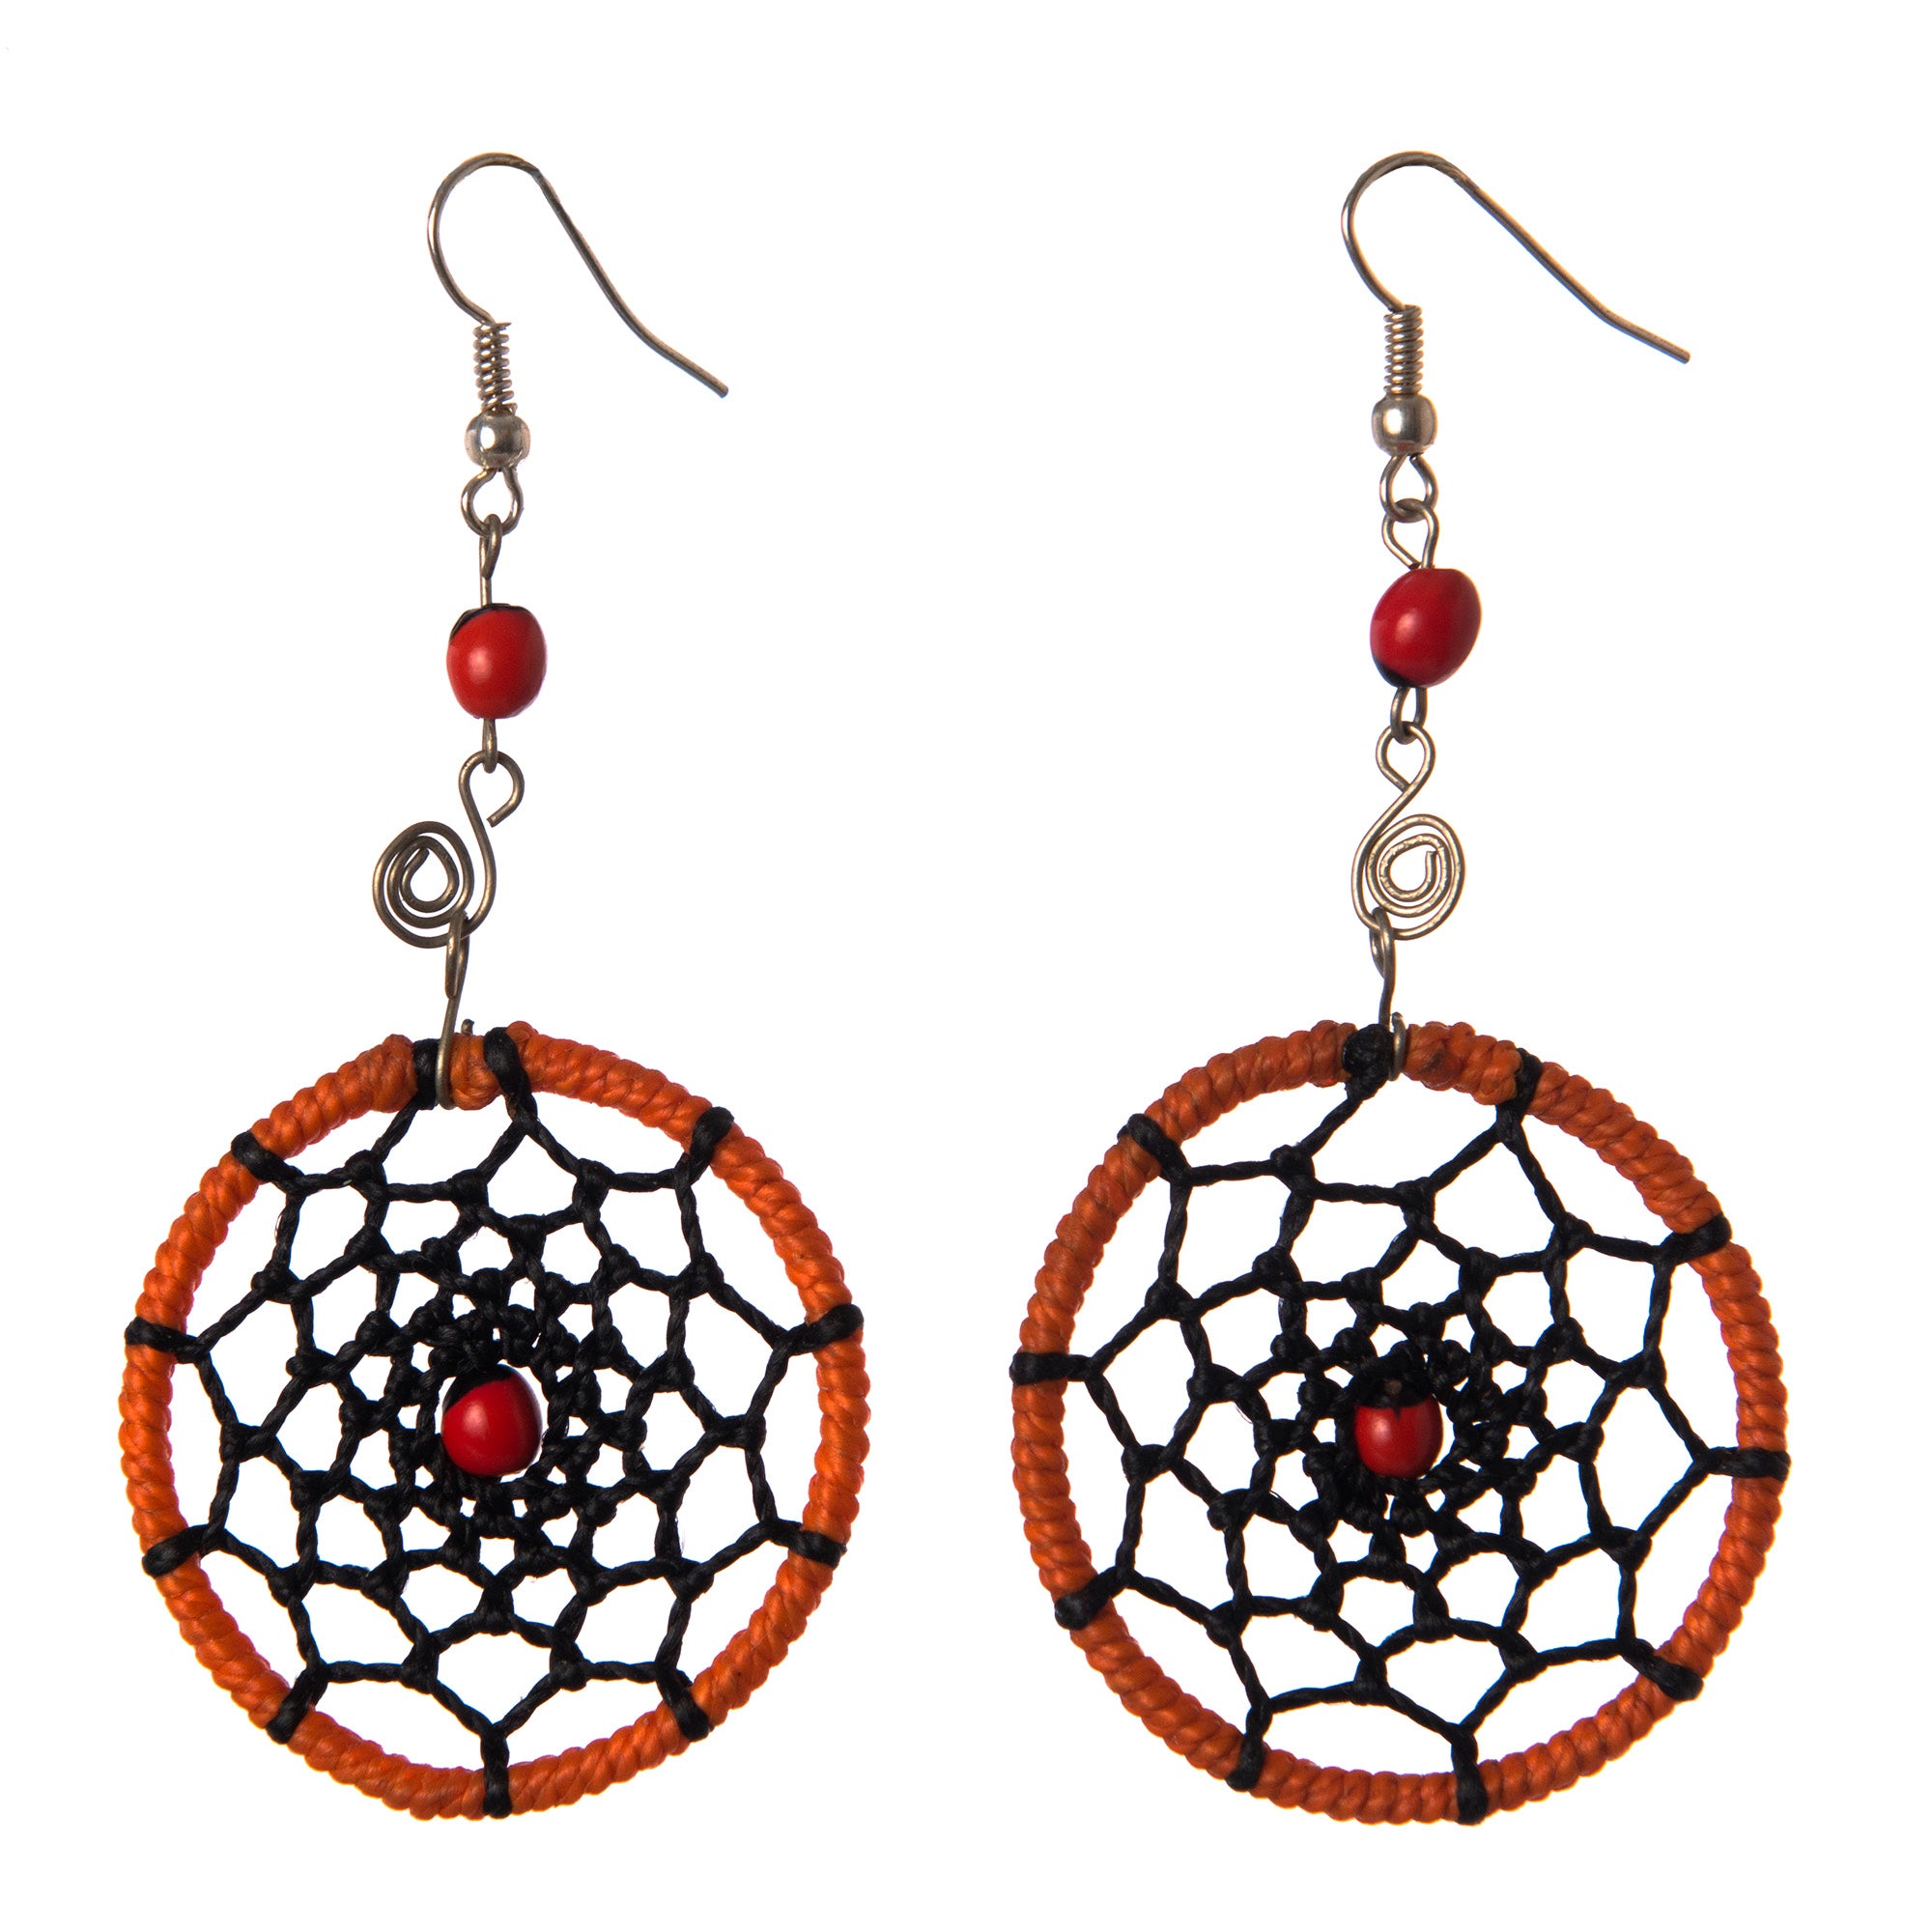 Spider Web with Huayruru Bead Earrings, Thread Wrapped Wire